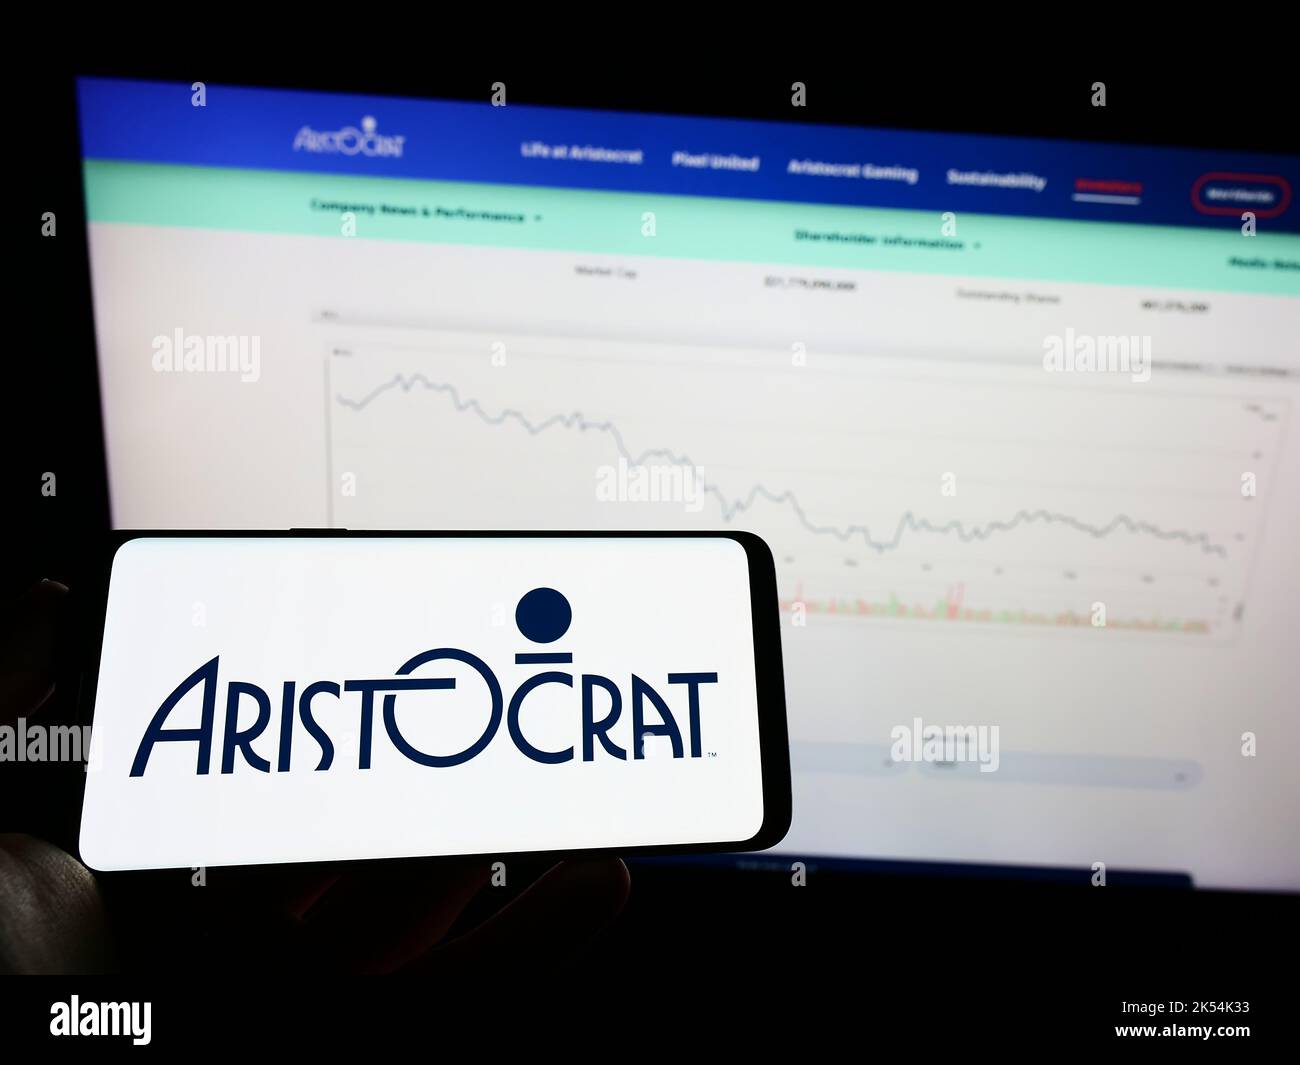 Person holding mobile phone with logo of gambling company Aristocrat Leisure Limited on screen in front of web page. Focus on phone display. Stock Photo